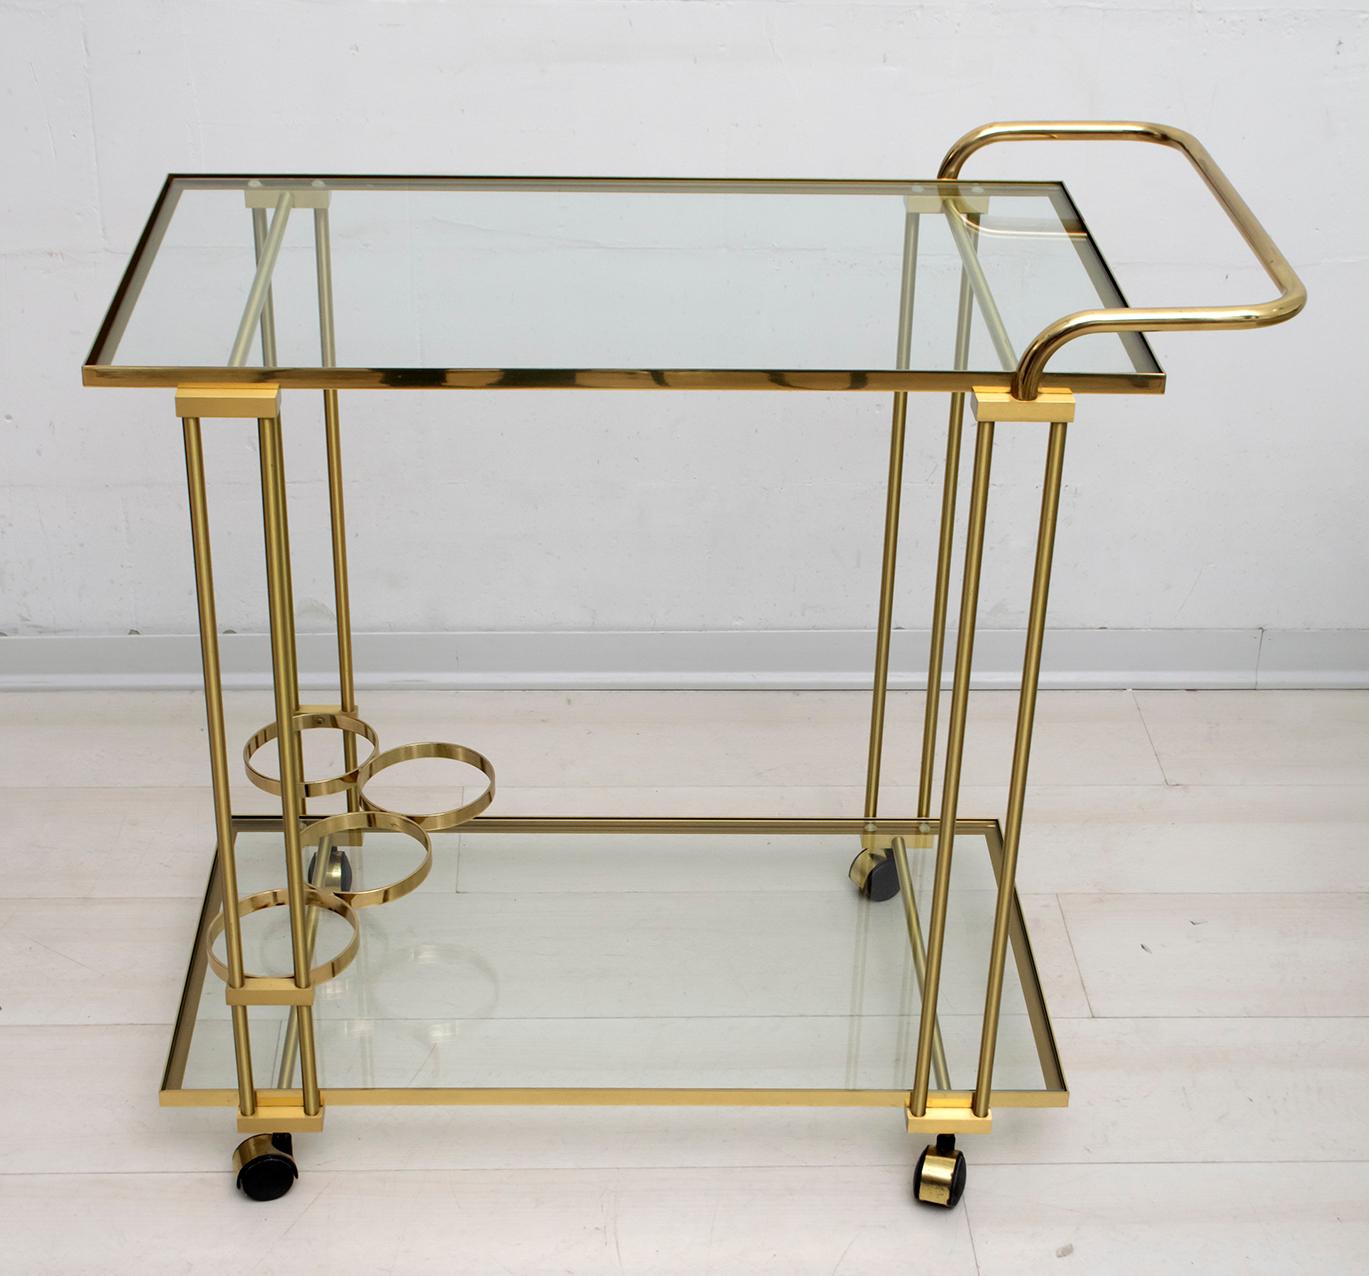 Midcentury brass bar cart, circa 1970s. It is versatile in size and can be used as a bar or serving cart or as an additional storage space in an office. It has four bottle holders at the bottom and two large glass shelves.
Italian production of